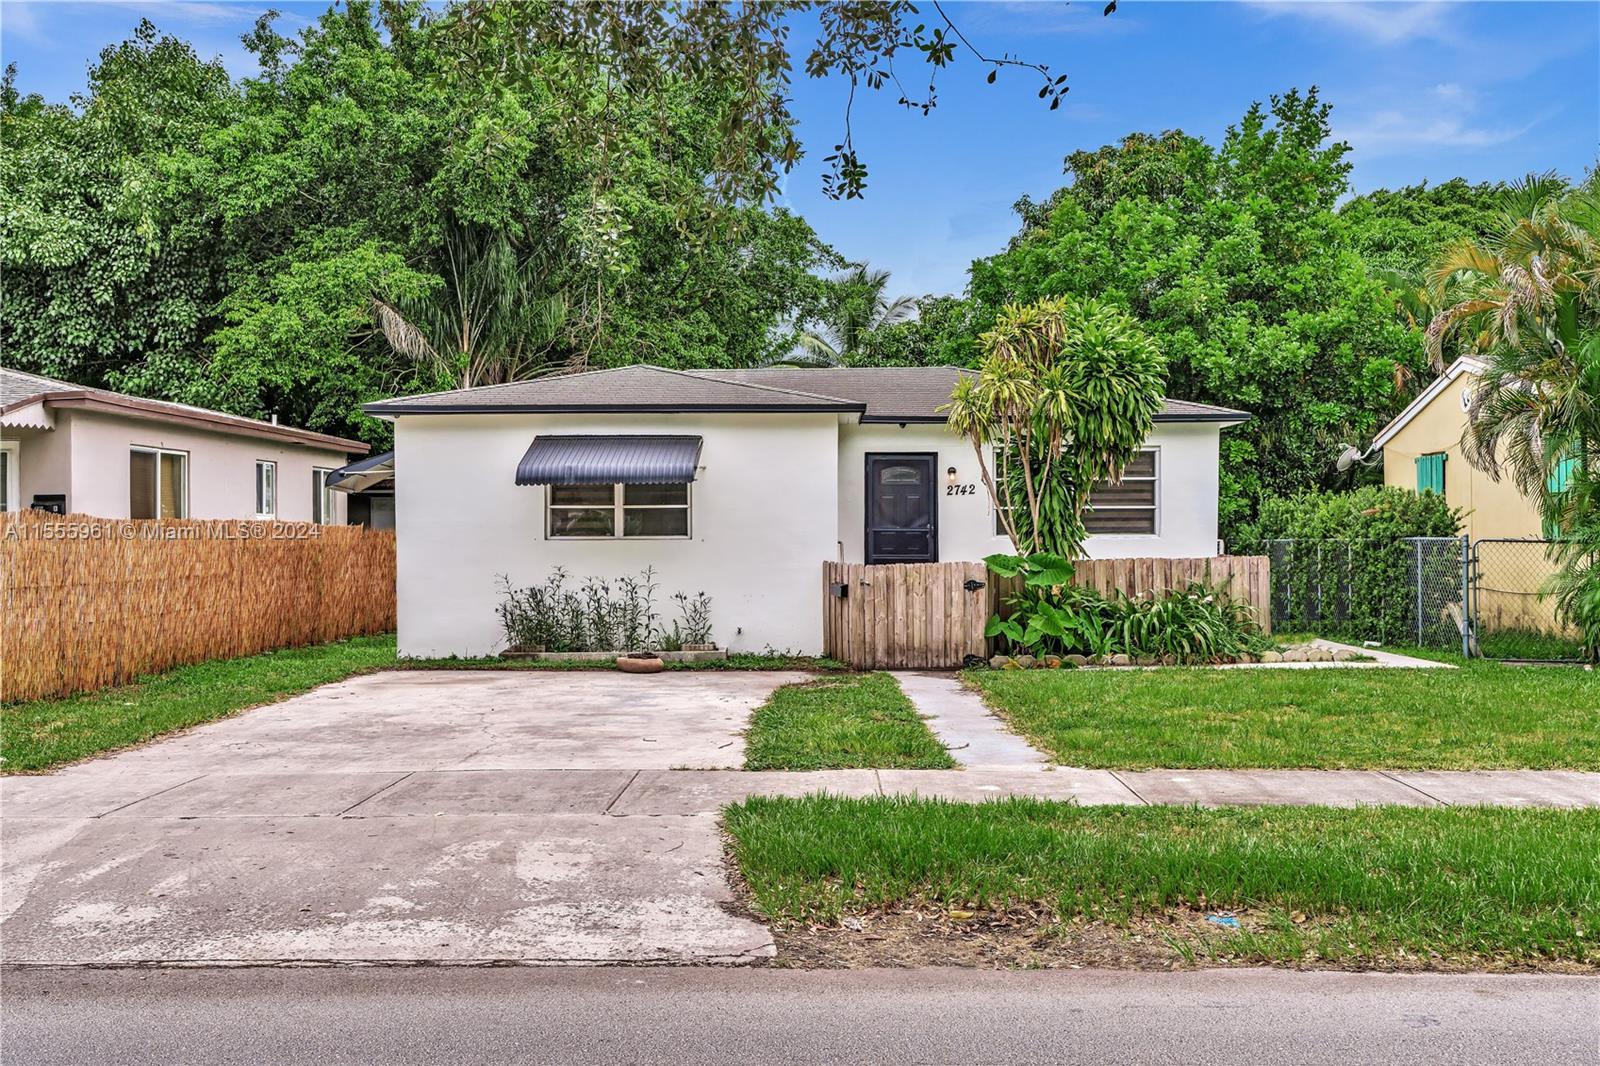 Discover this beautifully renovated 3-bedroom, 2-full bathroom single-family home, nestled in the he